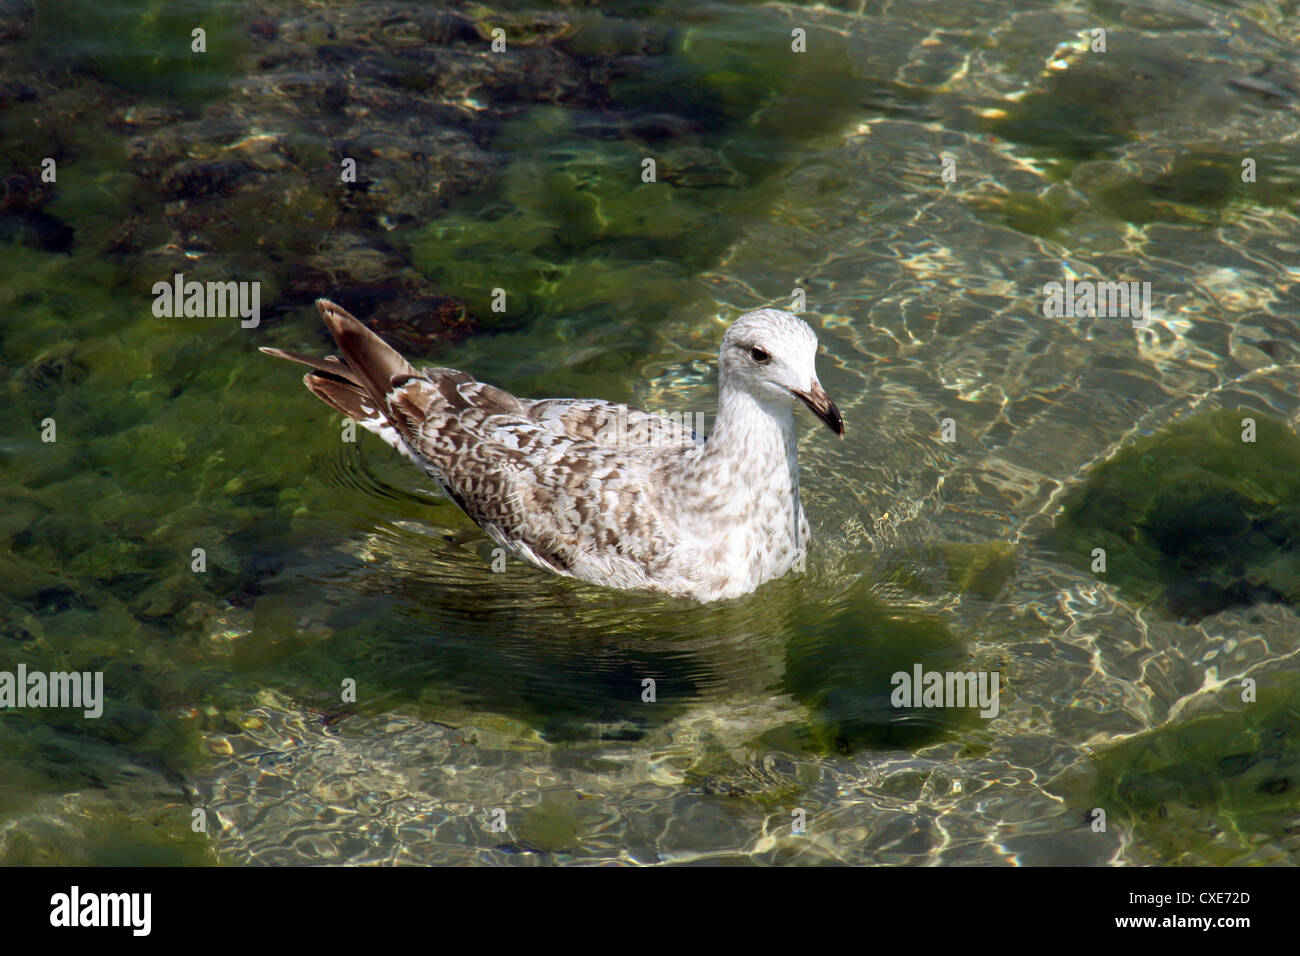 Kuehlungsborn, a gull floating on the water Stock Photo